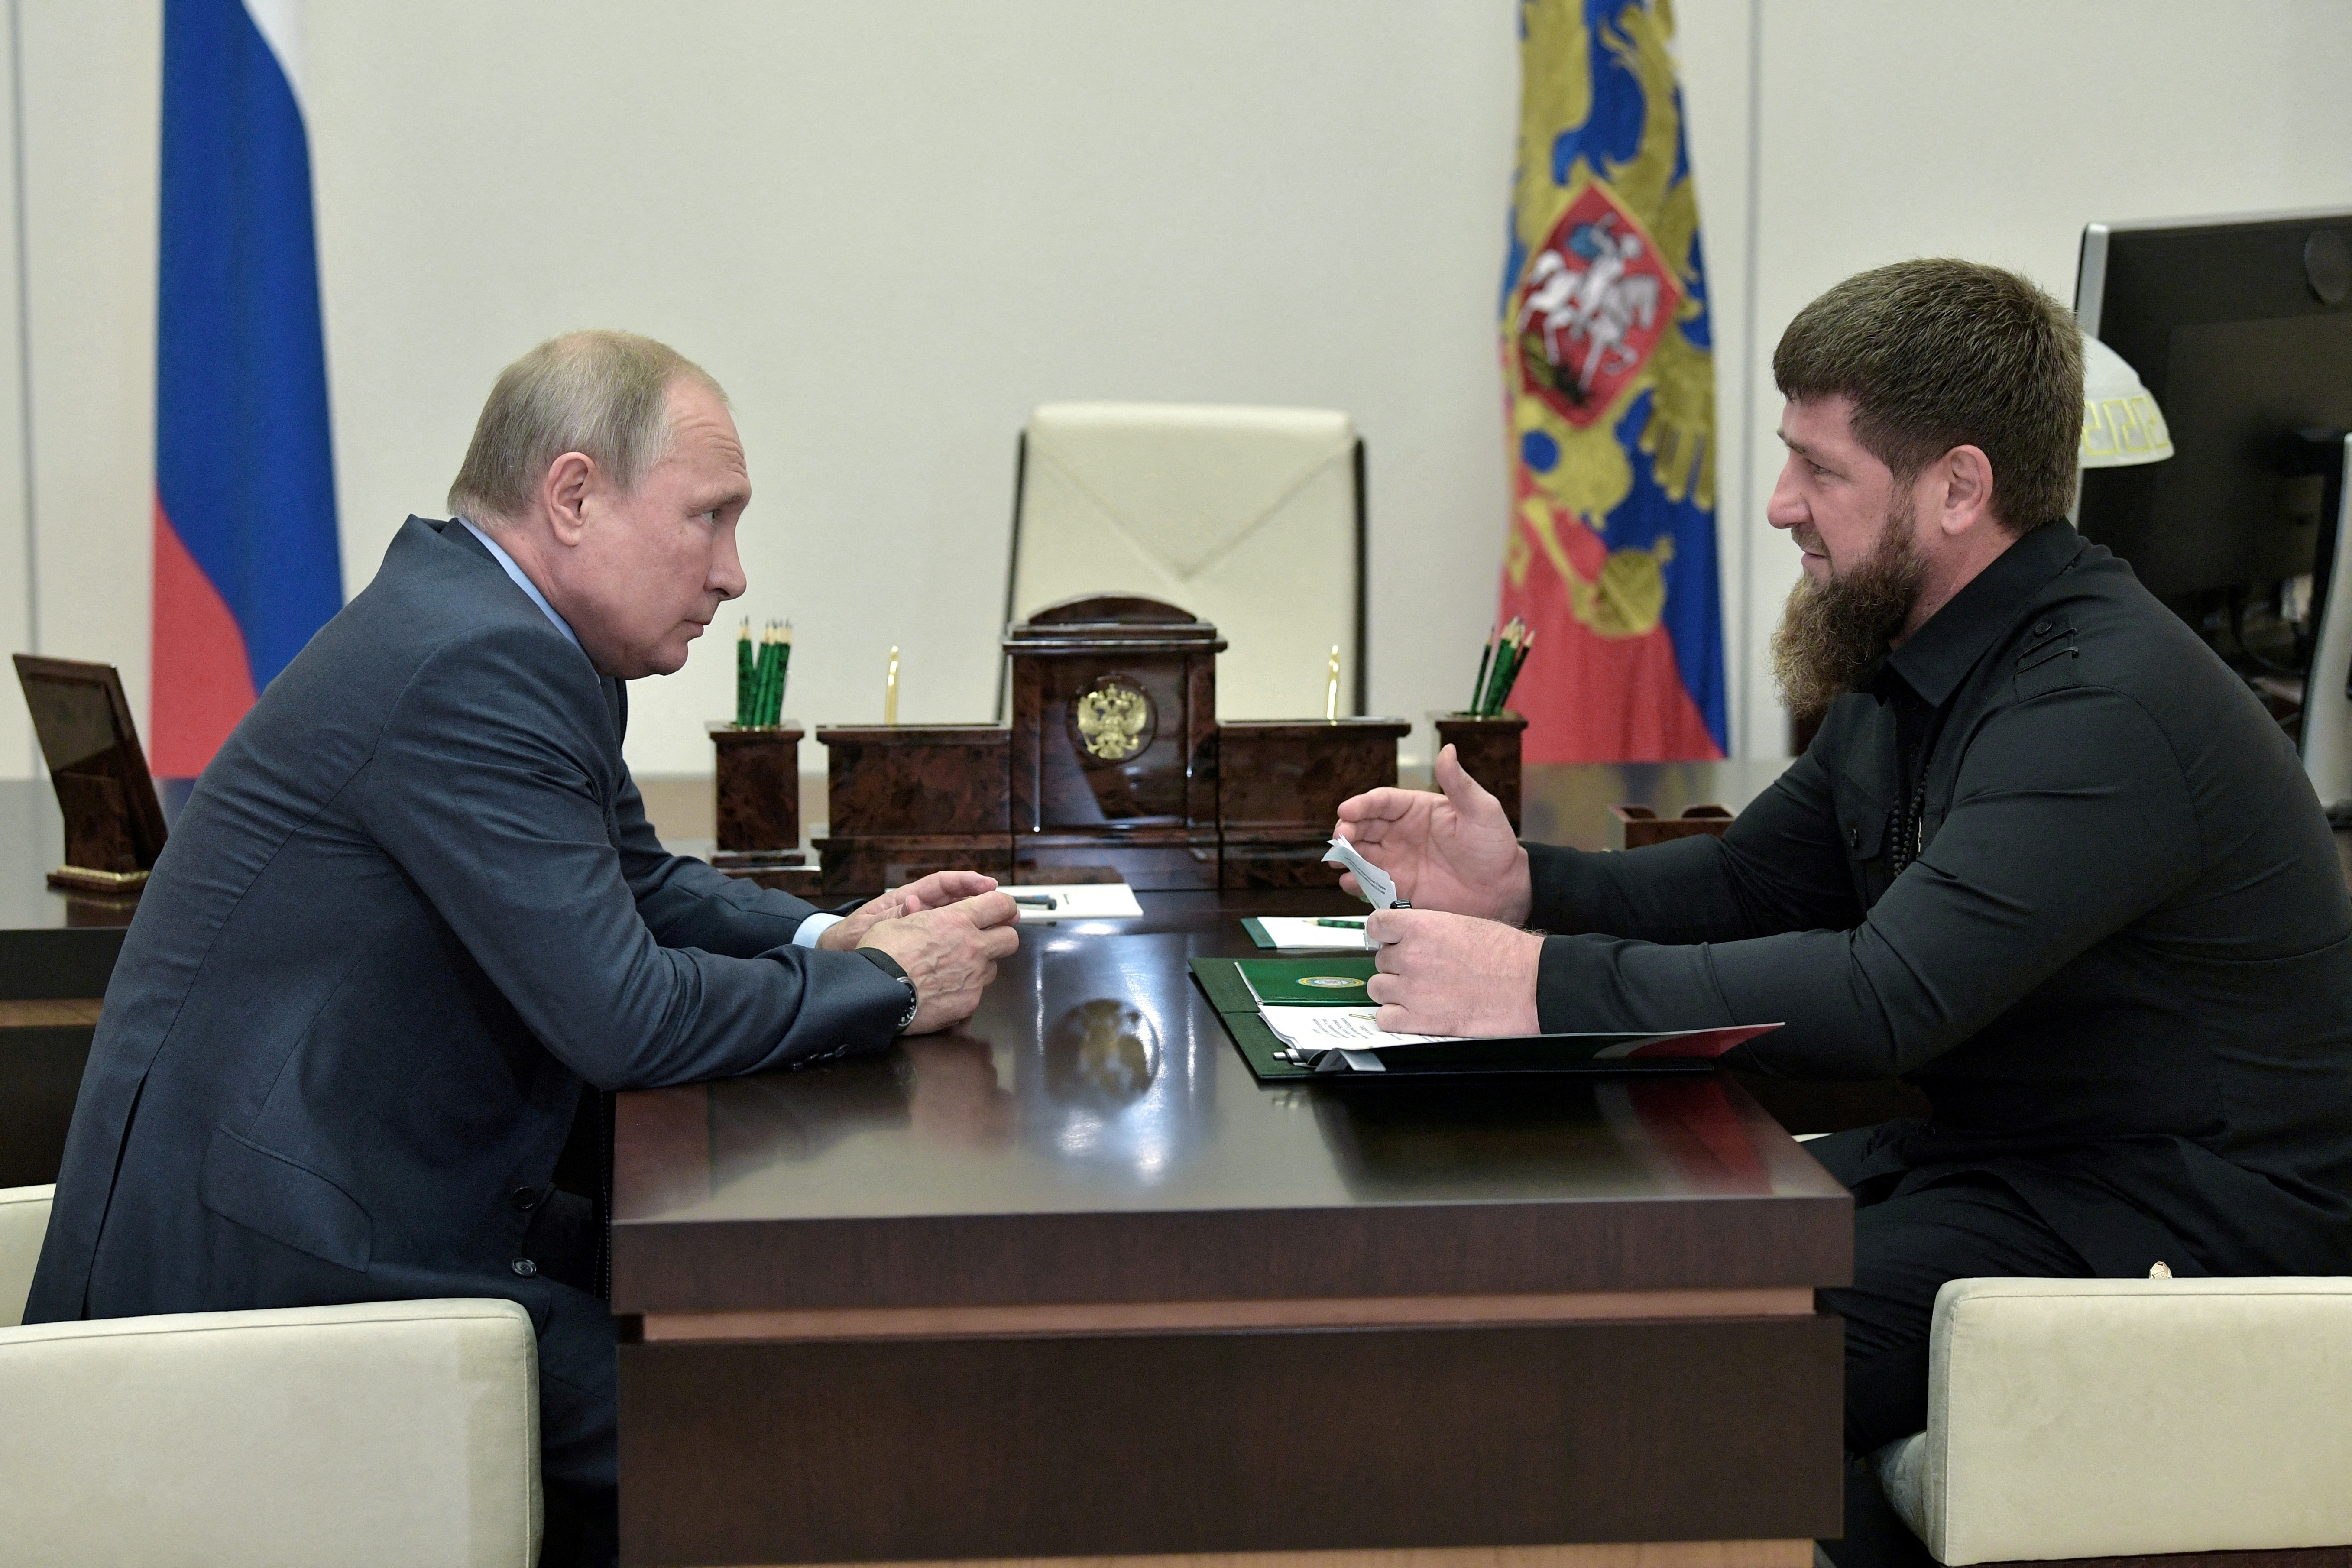 Russia's President Putin meets with head of the Chechen Republic Kadyrov near Moscow